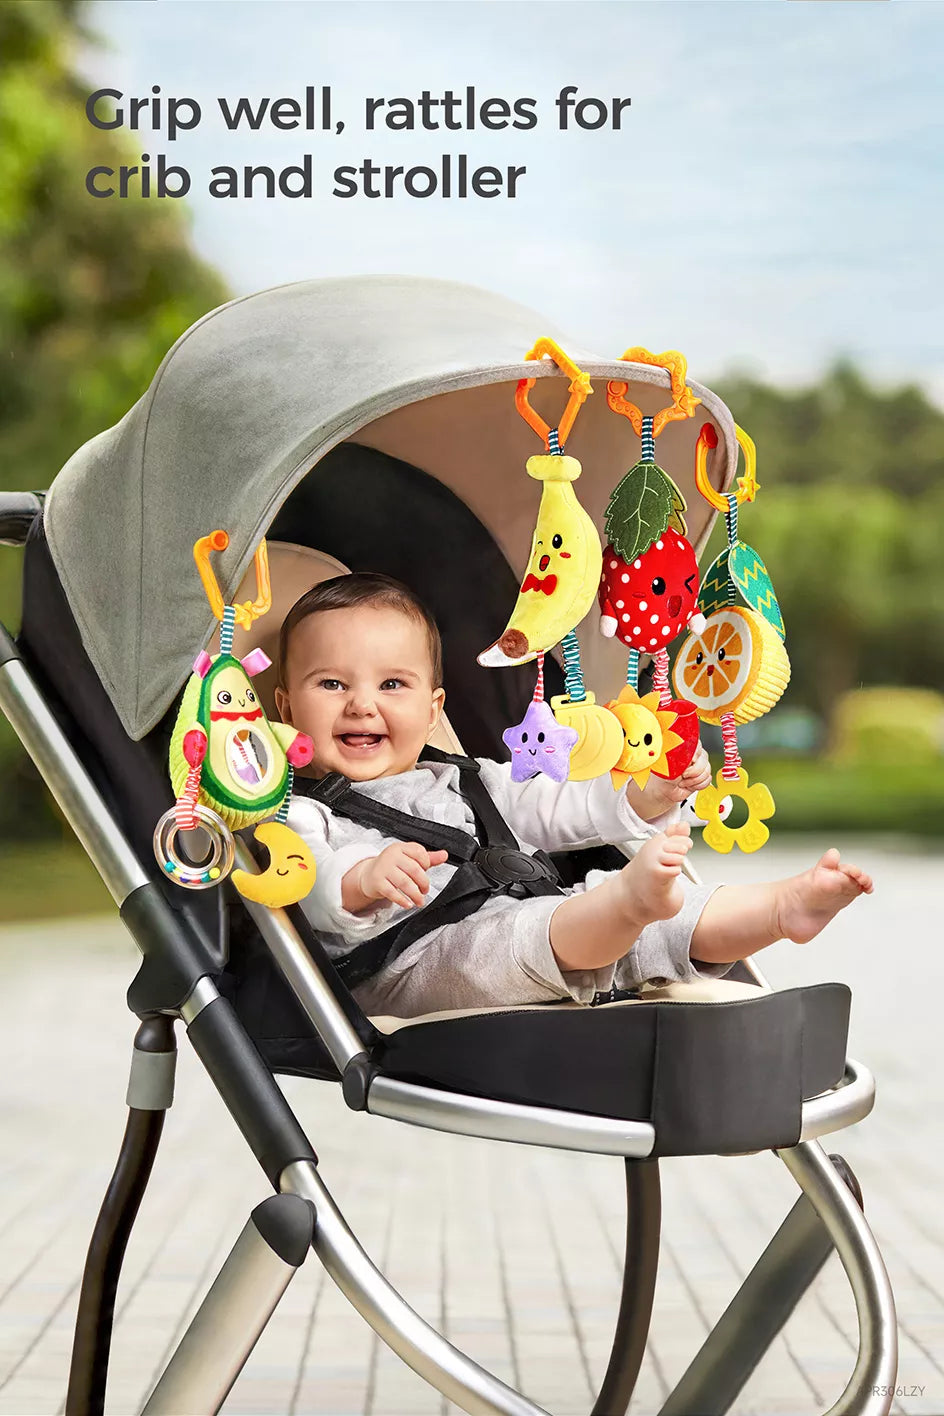 Baby toy hanging fruit rattles crip well rattles for crib and stroller